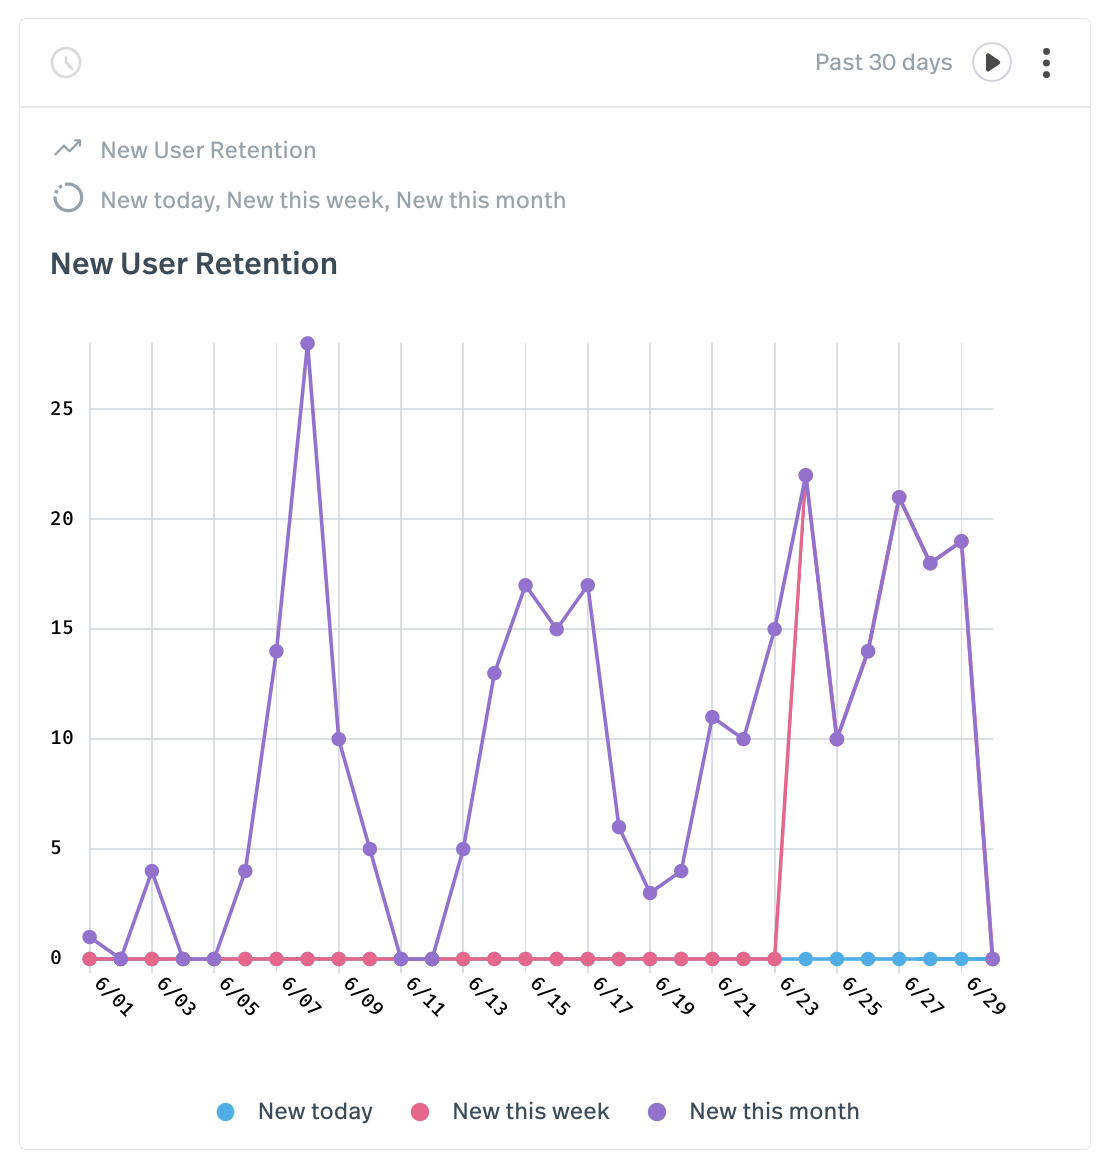 New User Retention Trends Over Time